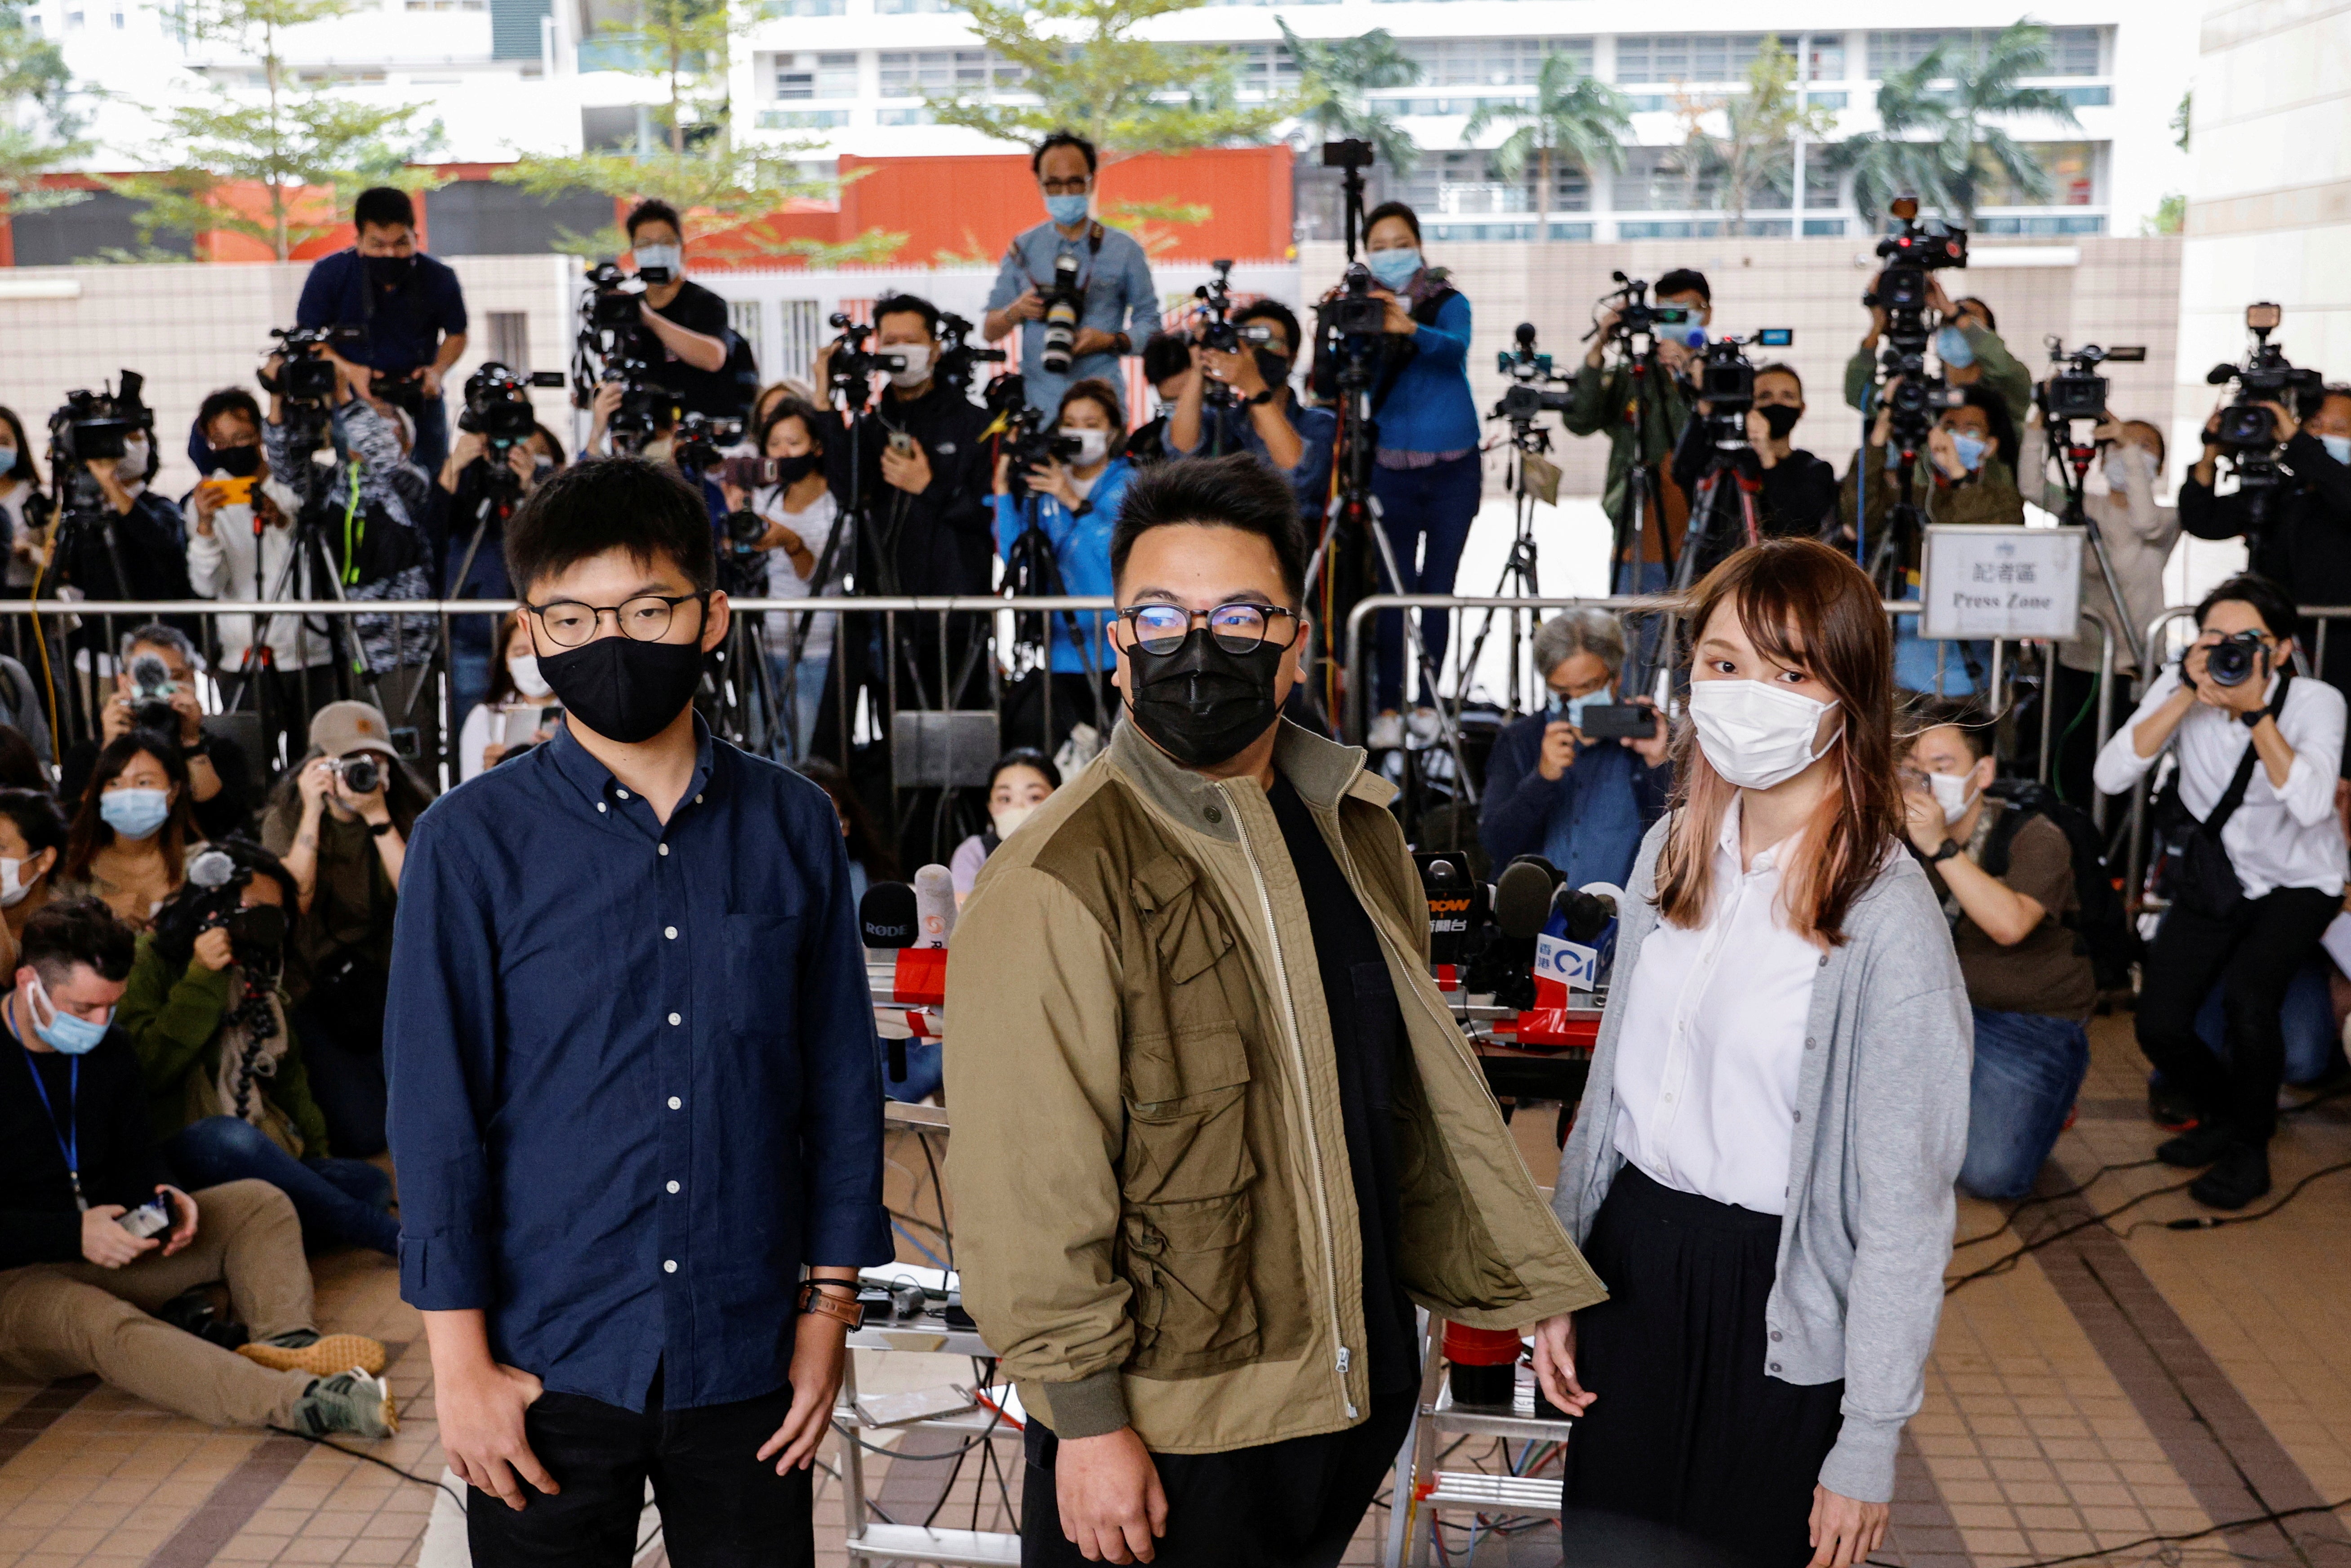 Pro-democracy activists Ivan Lam, Joshua Wong and Agnes Chow arrive at the West Kowloon Magistrates’ Courts on Monday (23 November)